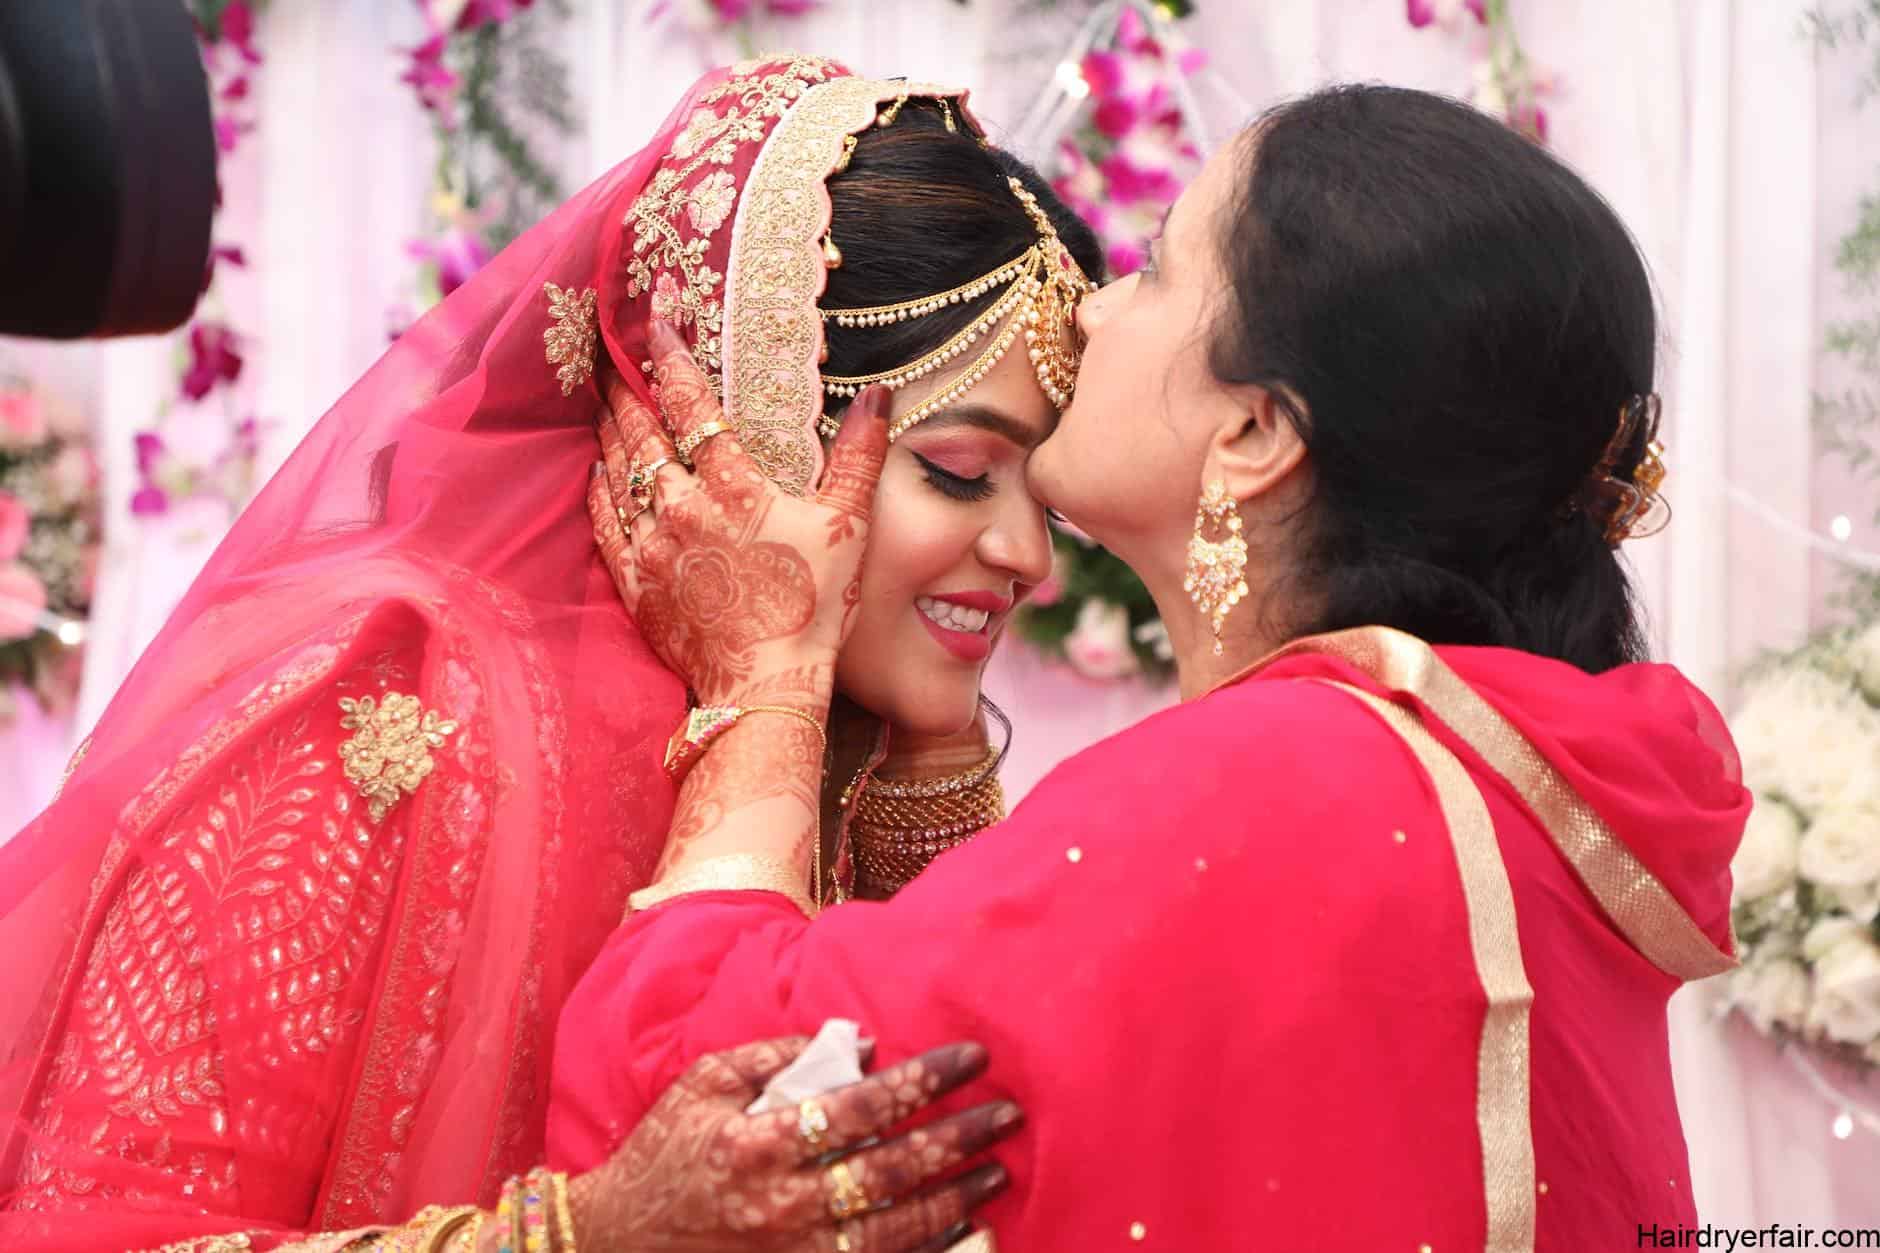 woman in red dress kissing on forehead a woman in wedding dress